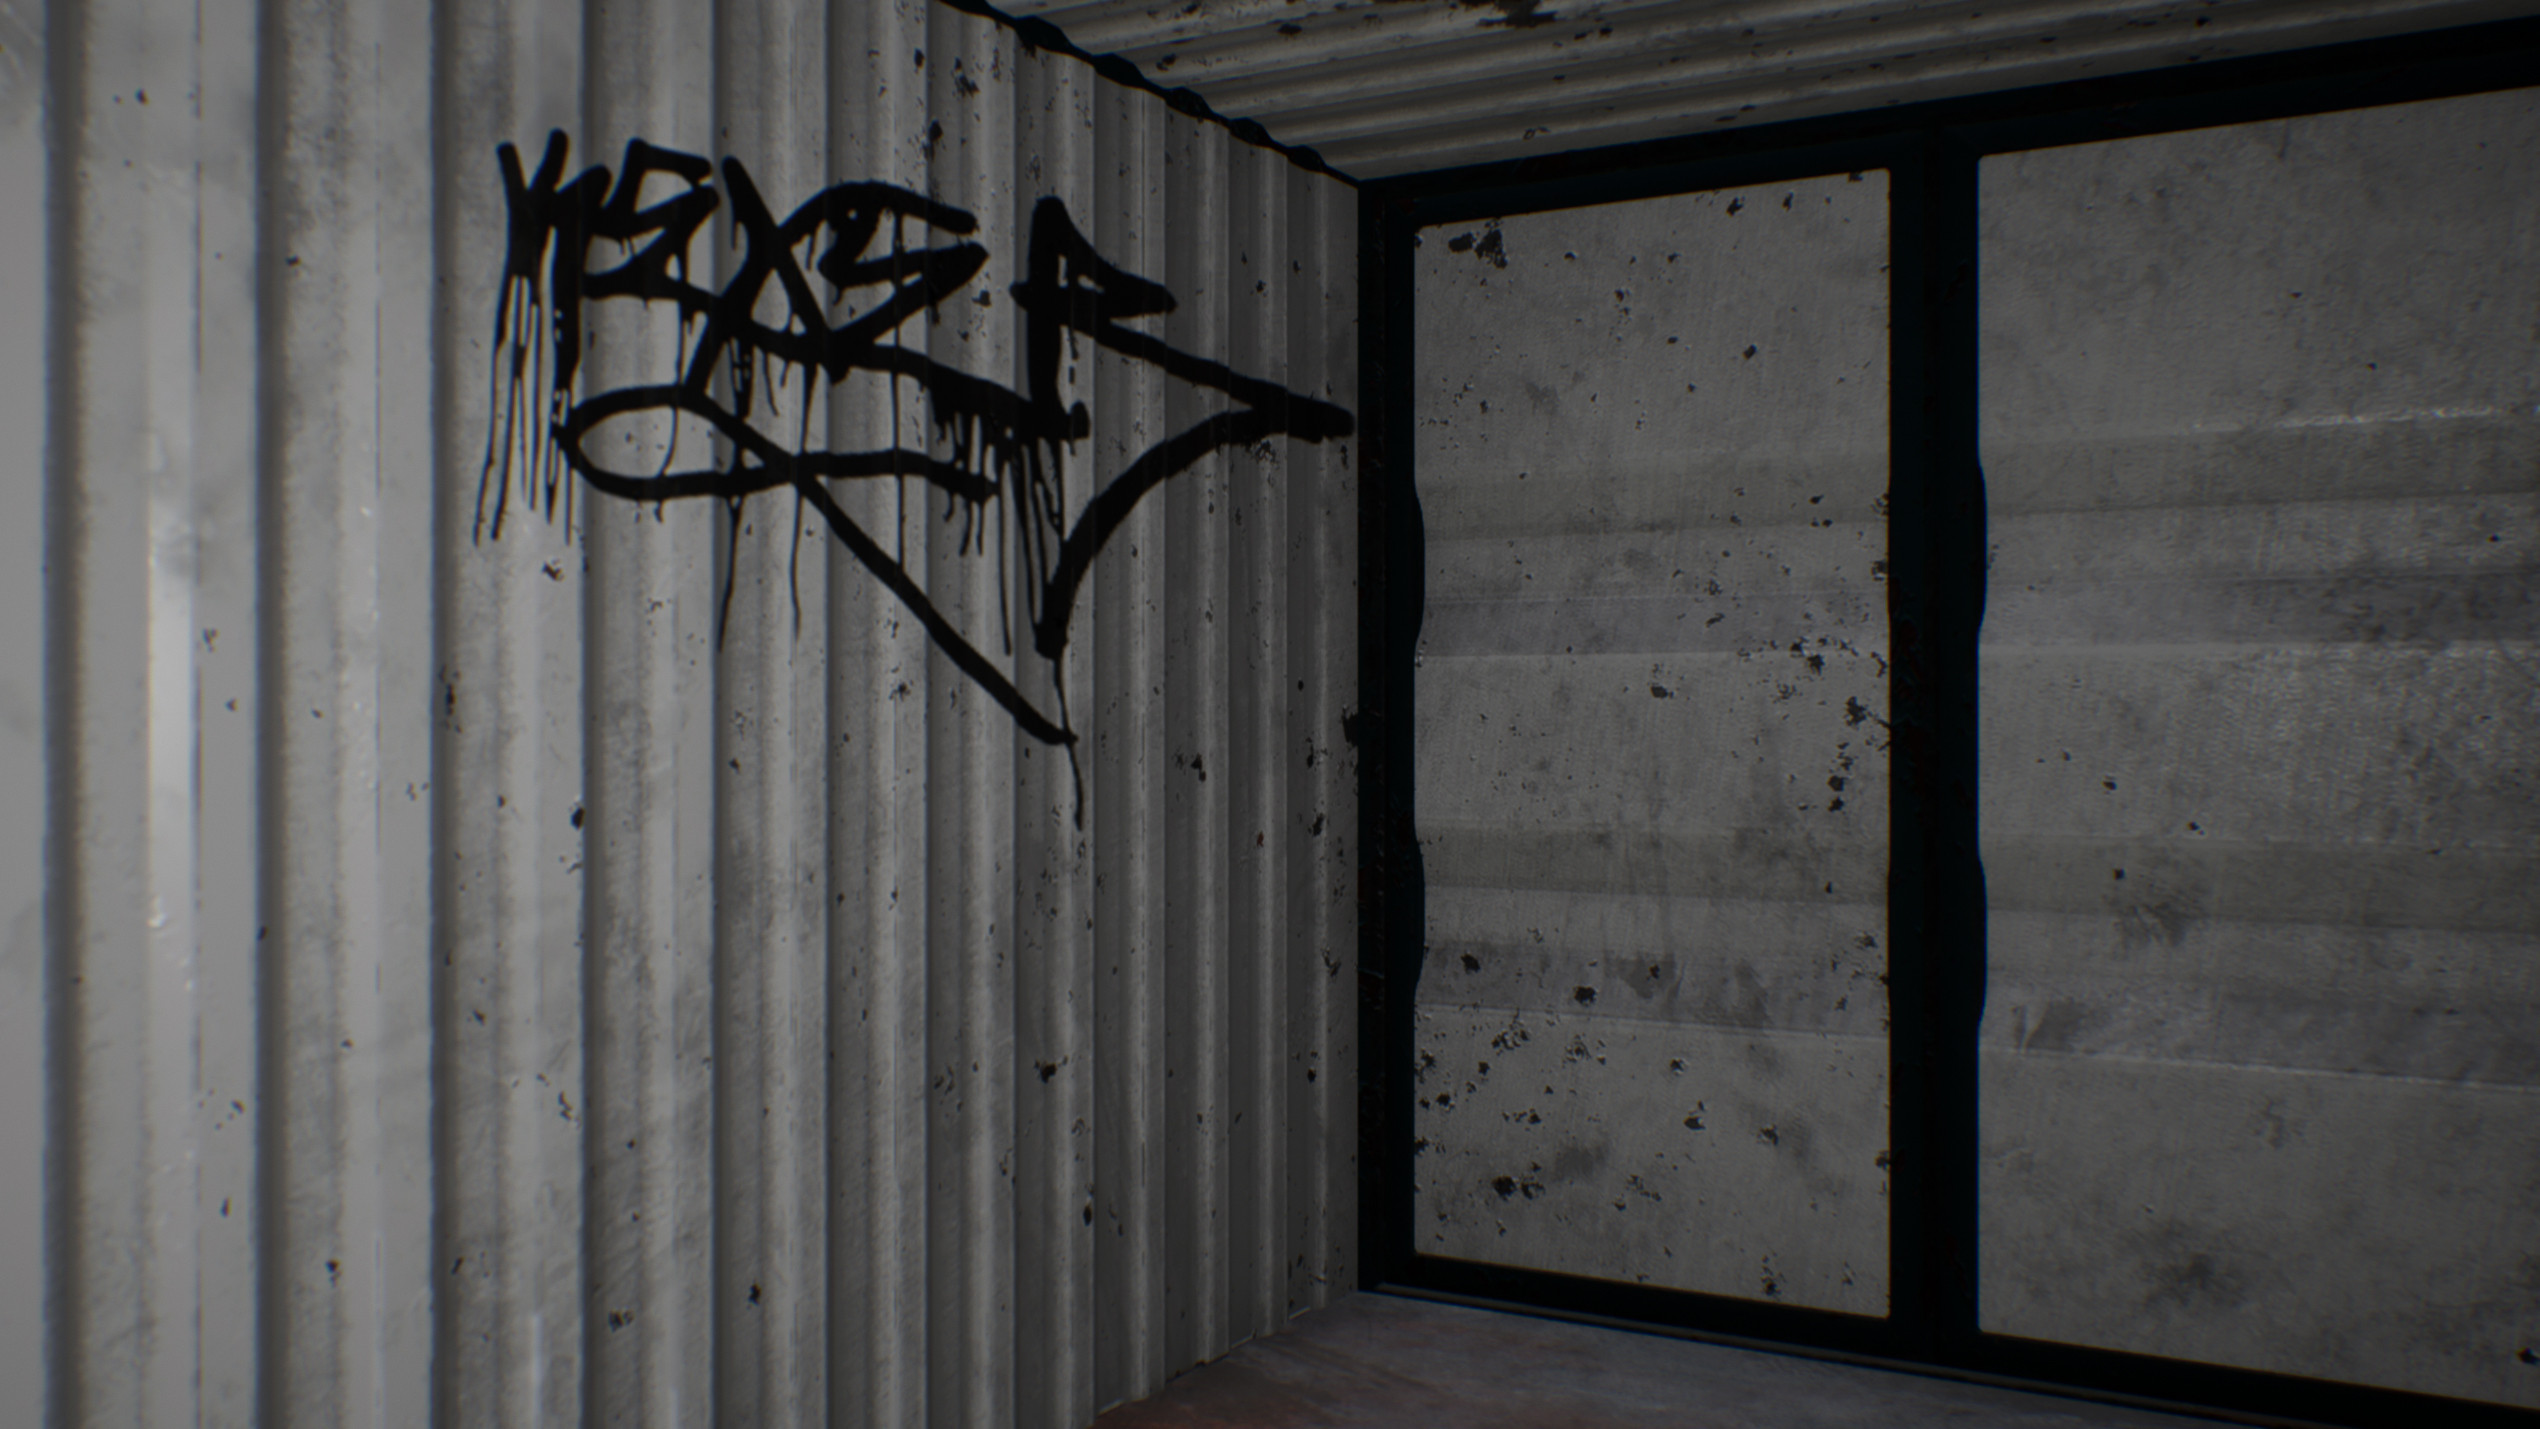 UE4 screenshot detailed shot inside the container.